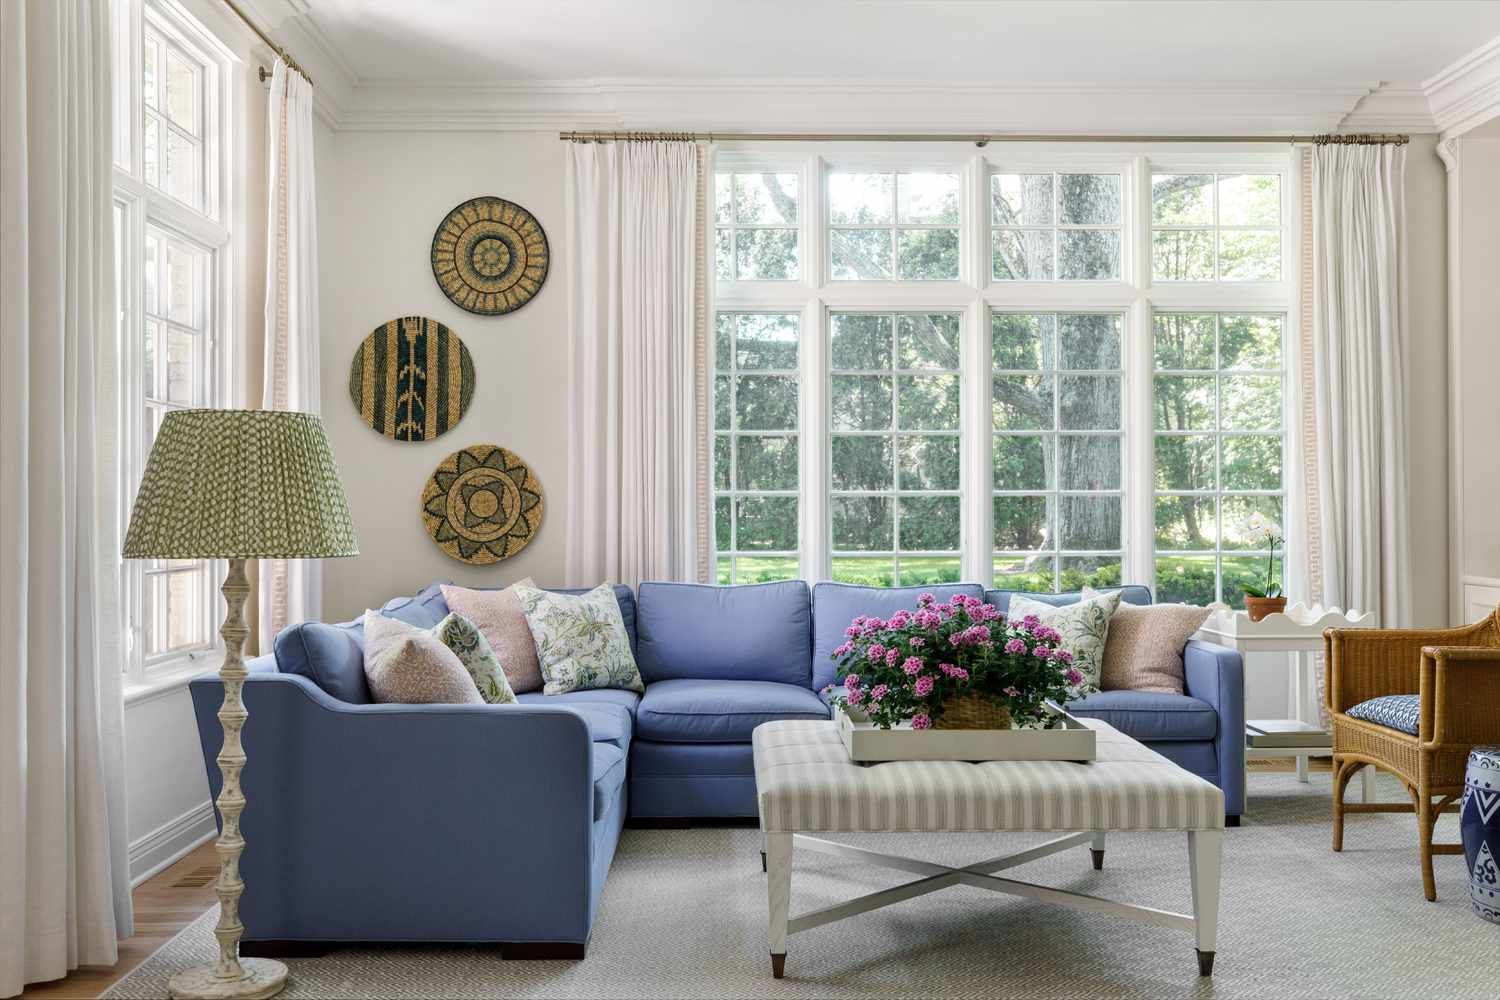 30 Blue Couch Living Room Ideas We Love With Regard To Sofas For Living Rooms (View 15 of 15)